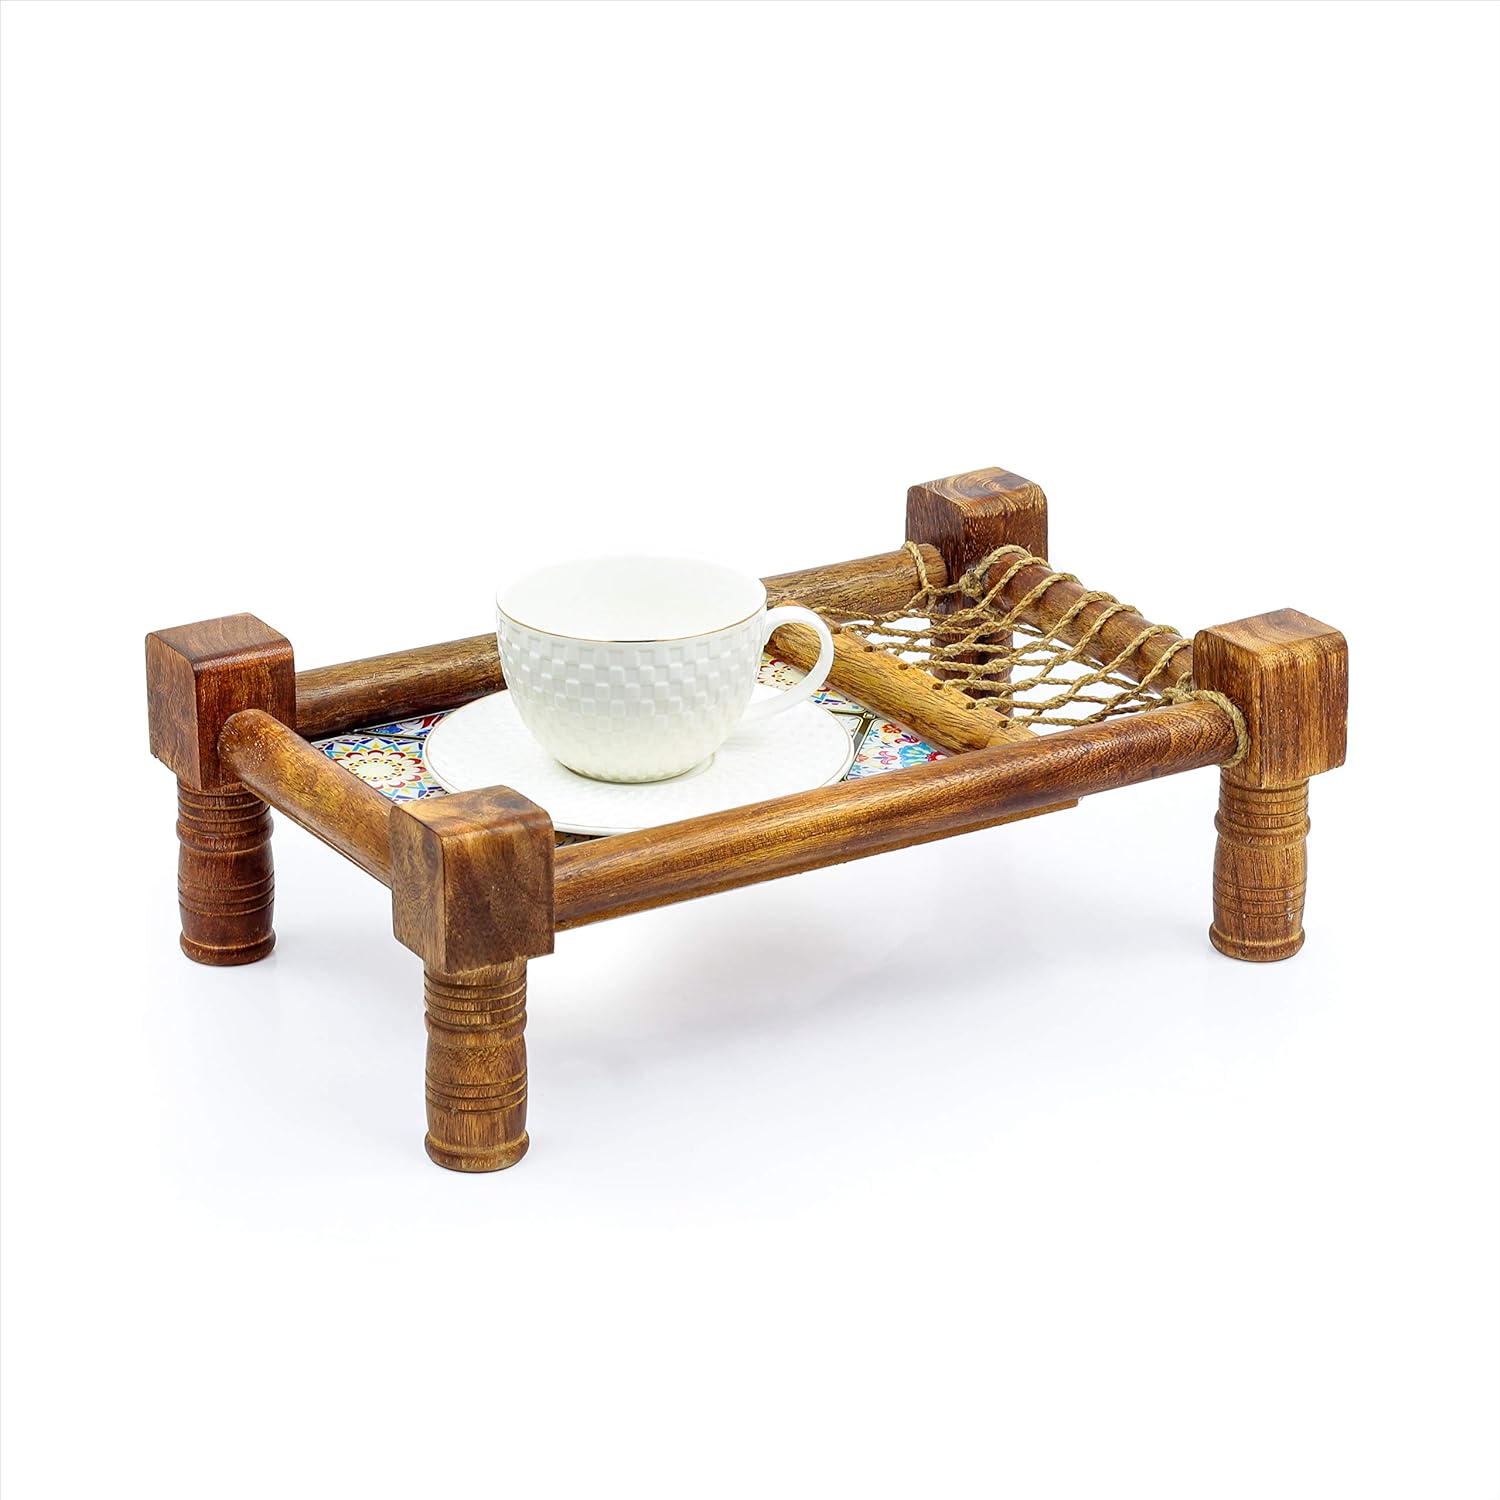 Indian Cot Decor Accent | Asian Cot Tray for Snacks and Drinks